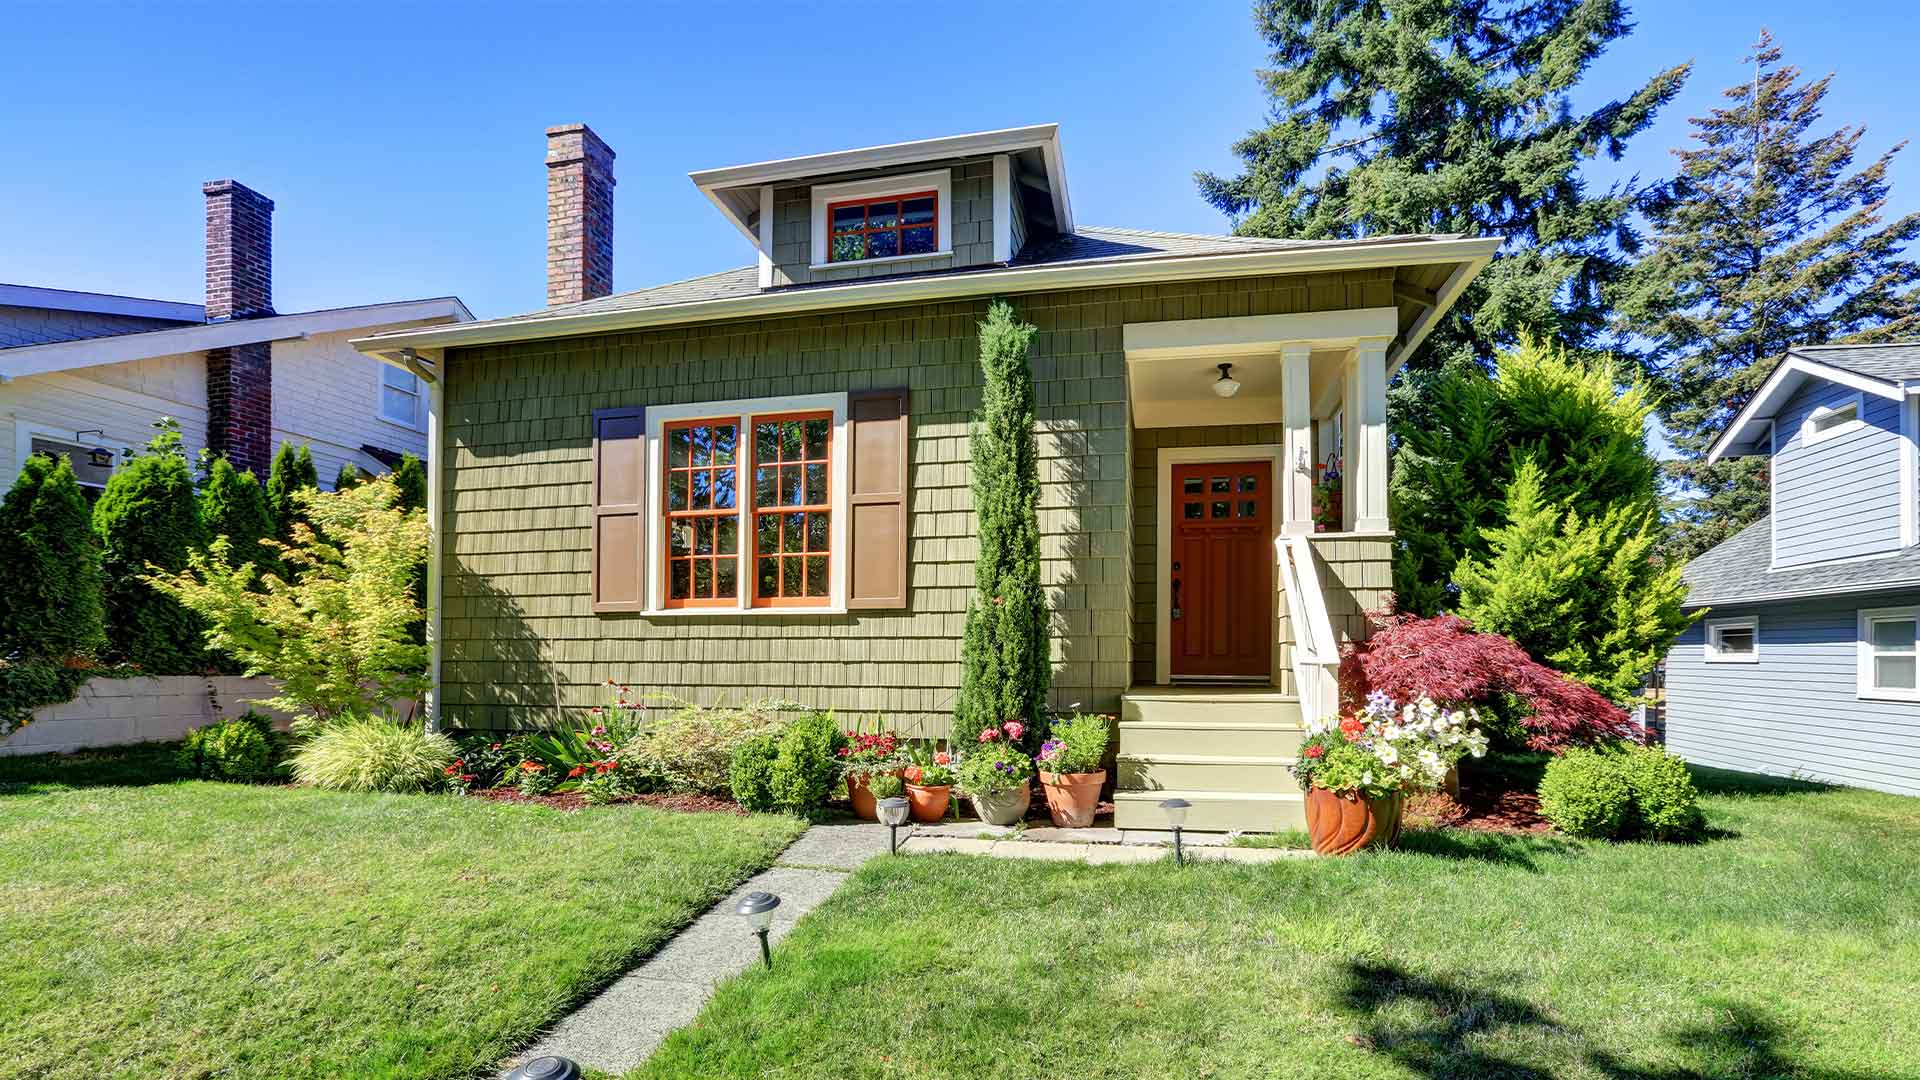 https://assets.themortgagereports.com/wp-content/uploads/2021/05/How-to-qualify-as-a-first-time-home-buyer.jpg